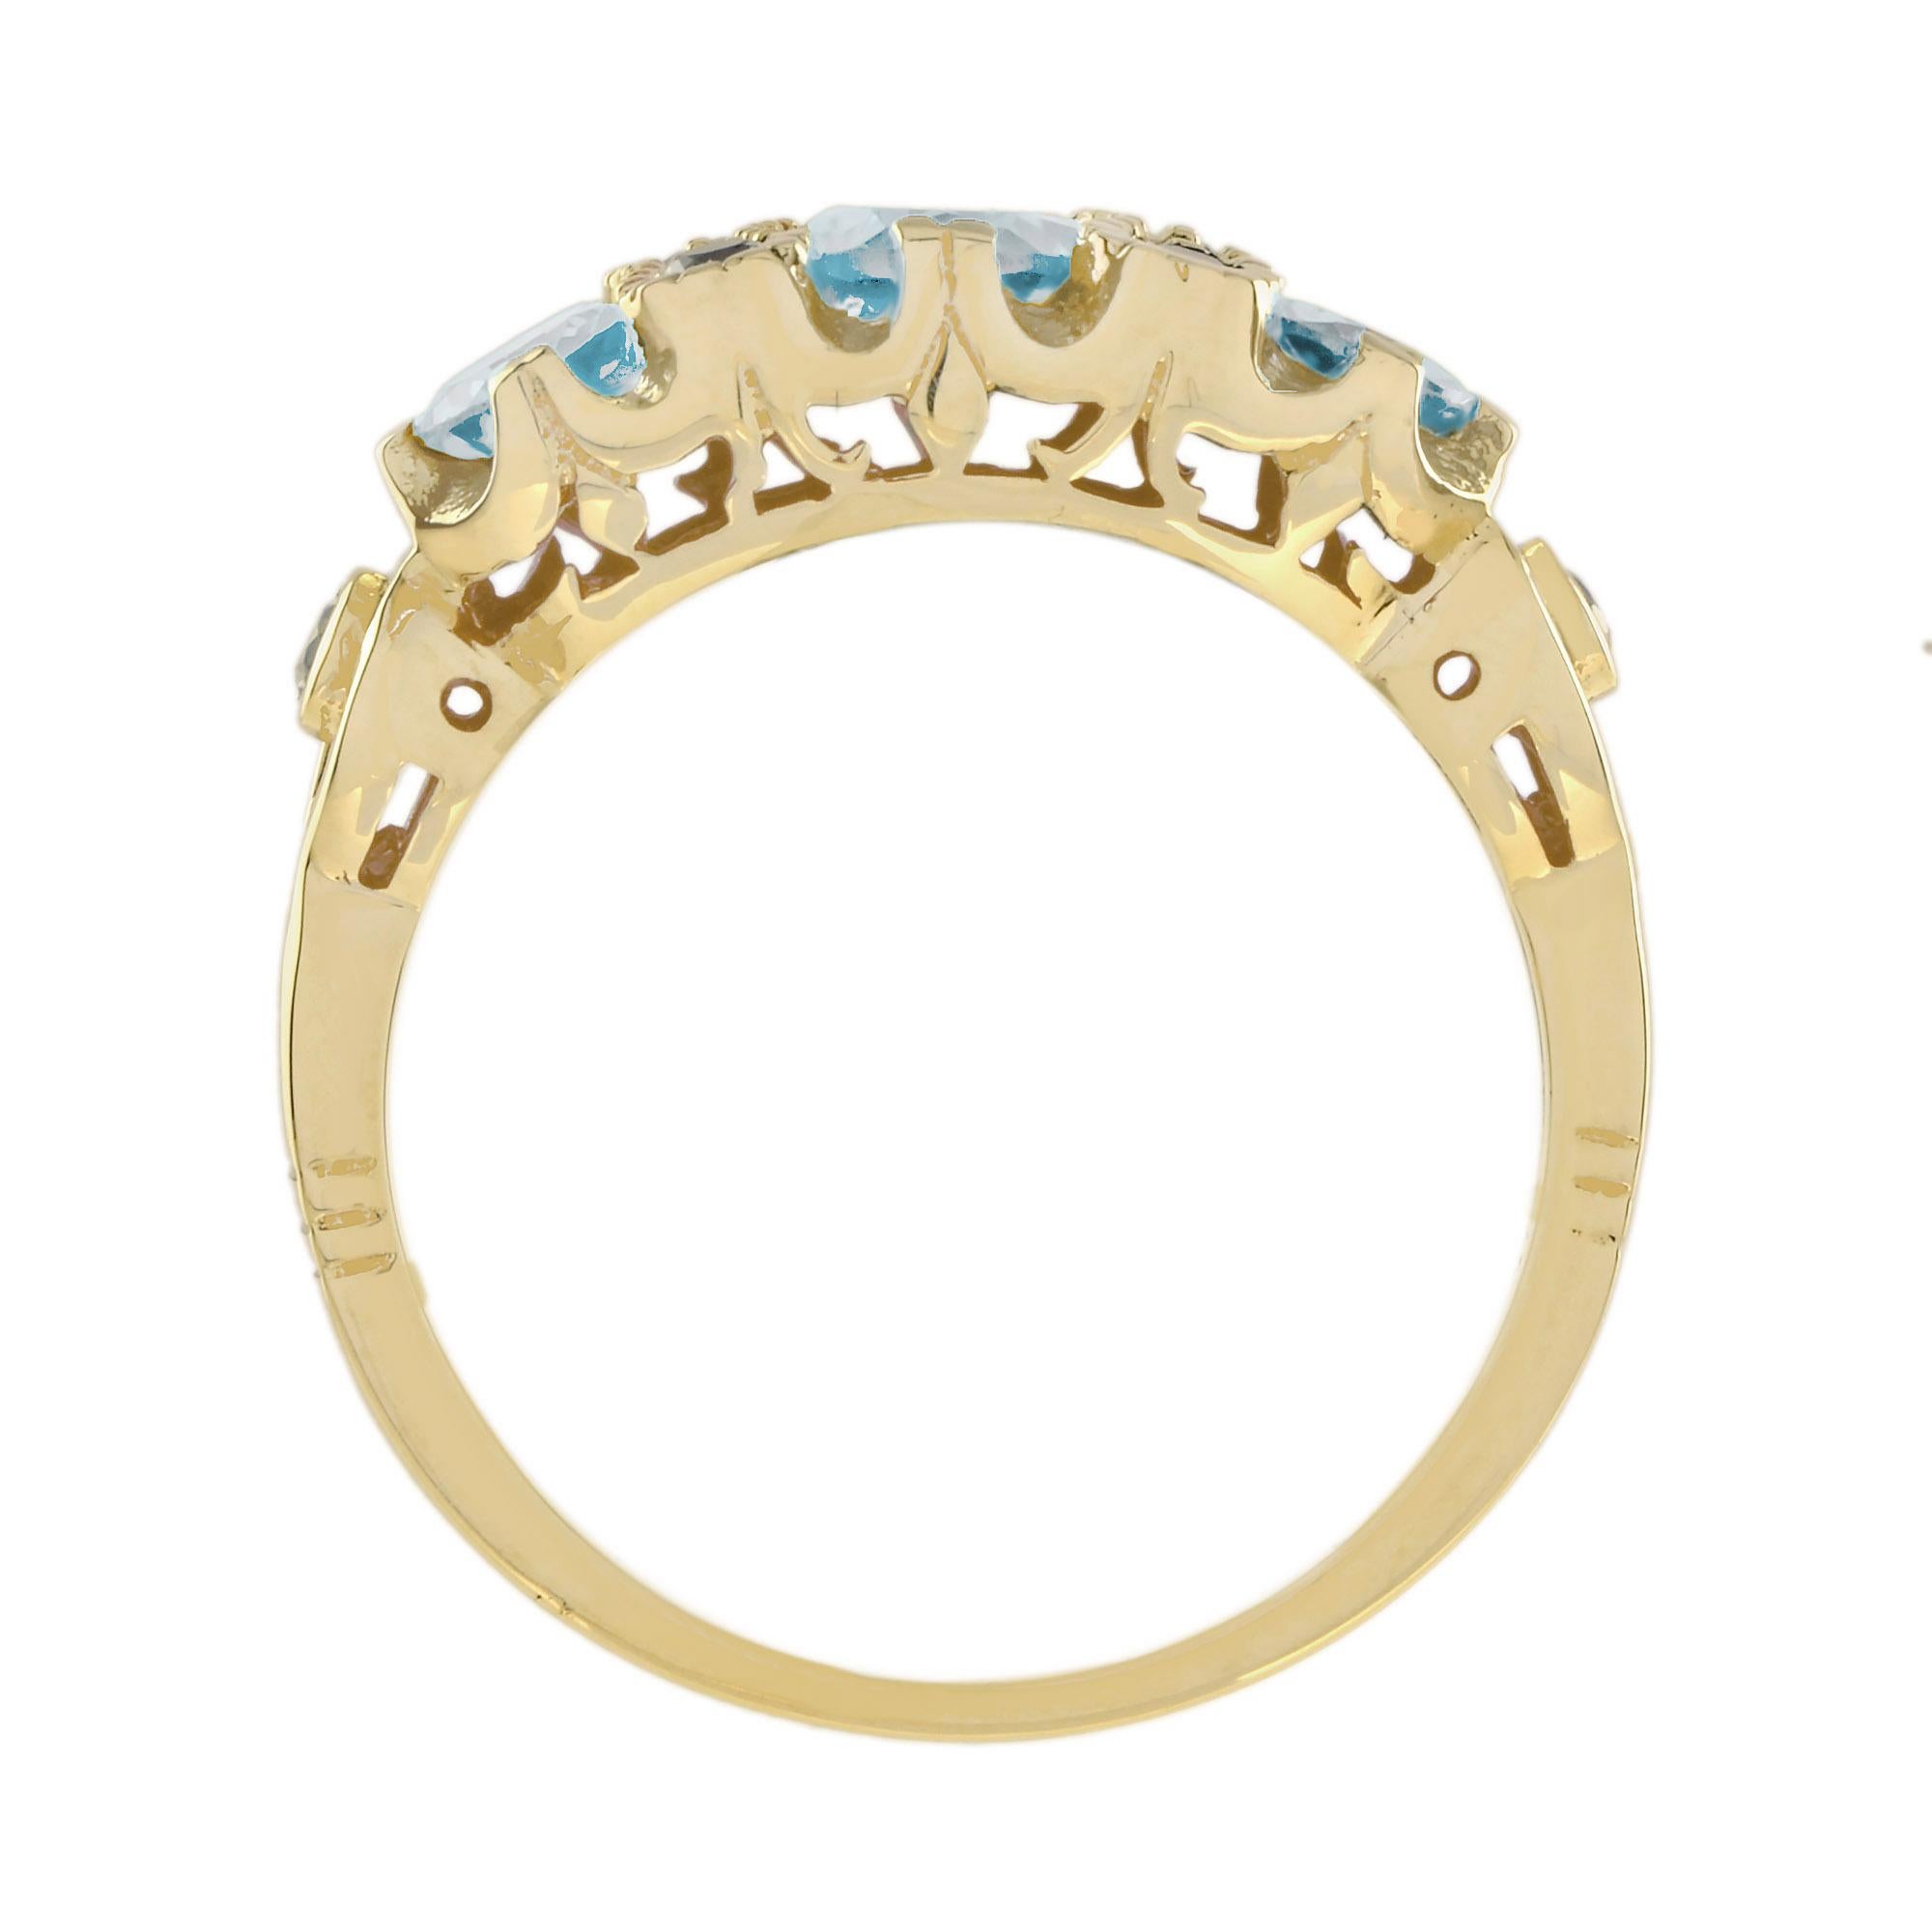 For Sale:  Blue Topaz and Diamond Vintage Style Three Stone Ring in 9K Yellow Gold 6